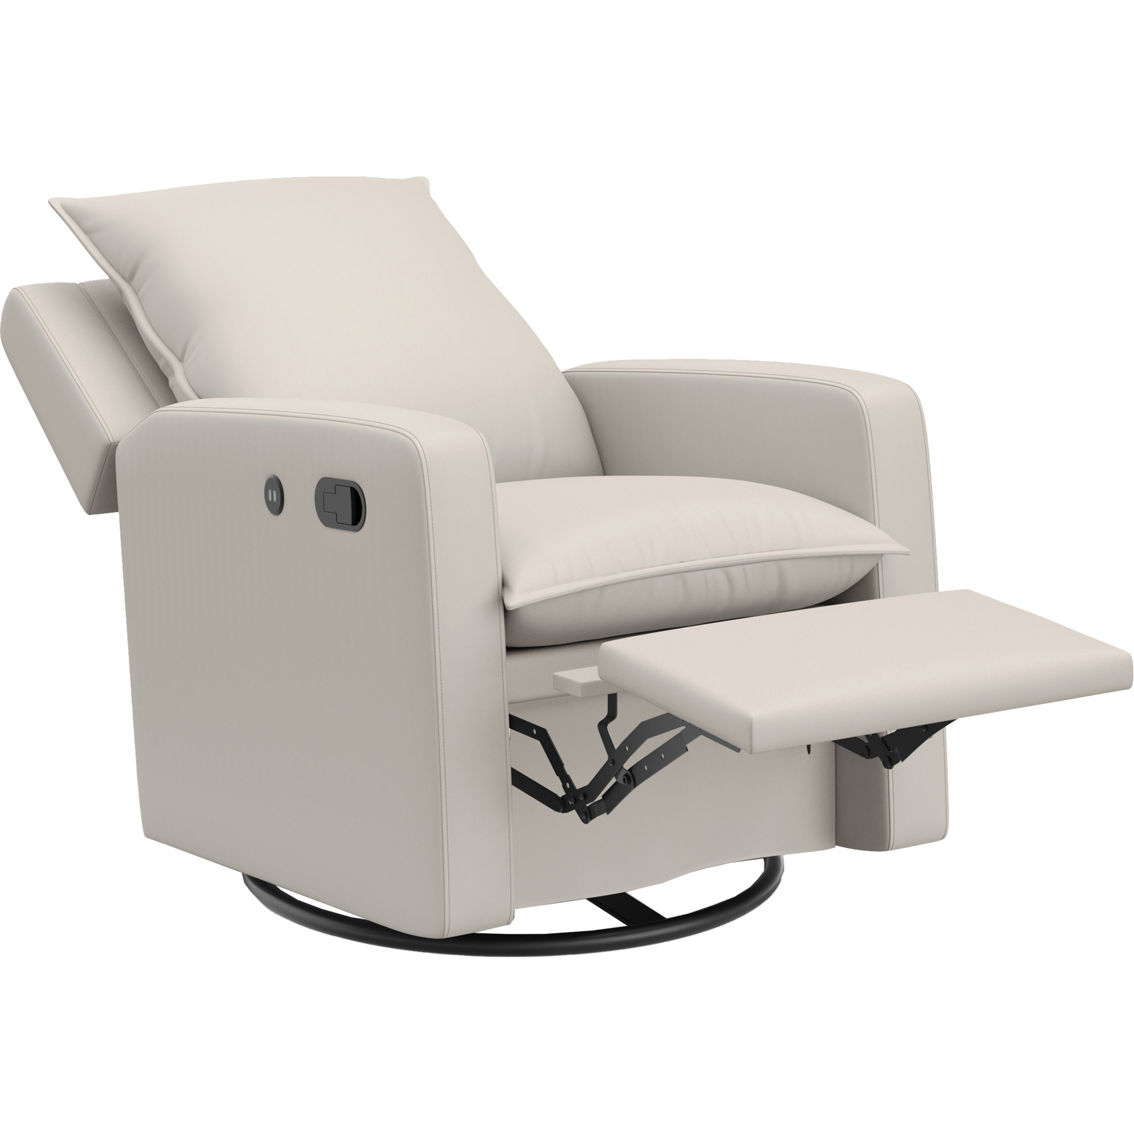 Storkcraft Timeless Recline Glider With USB - Image 4 of 9